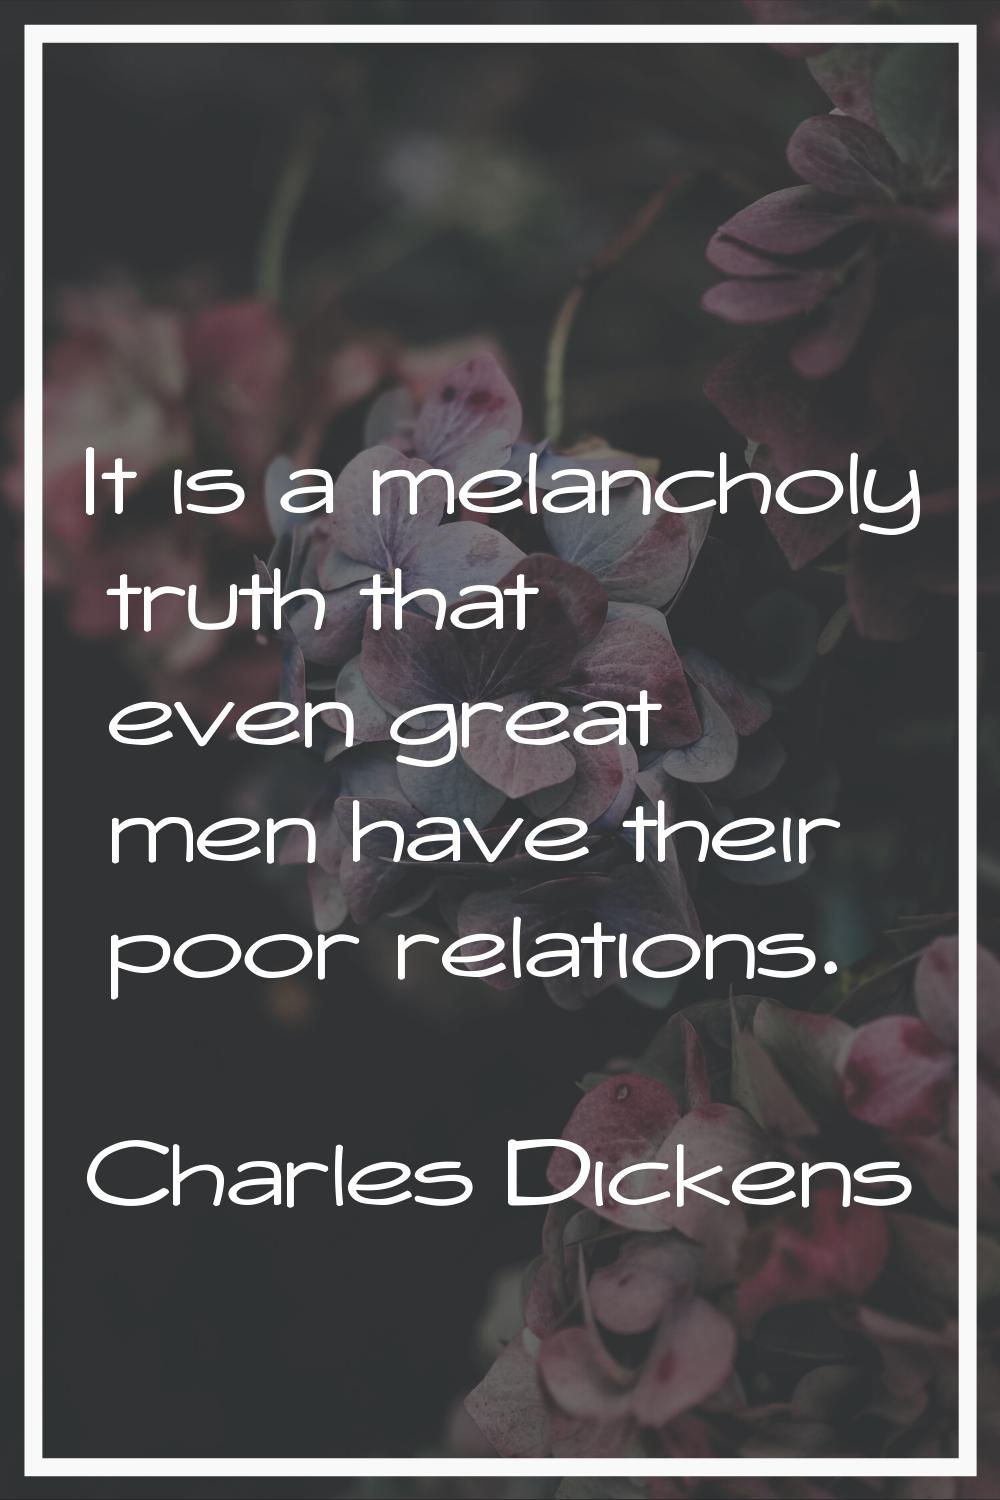 It is a melancholy truth that even great men have their poor relations.